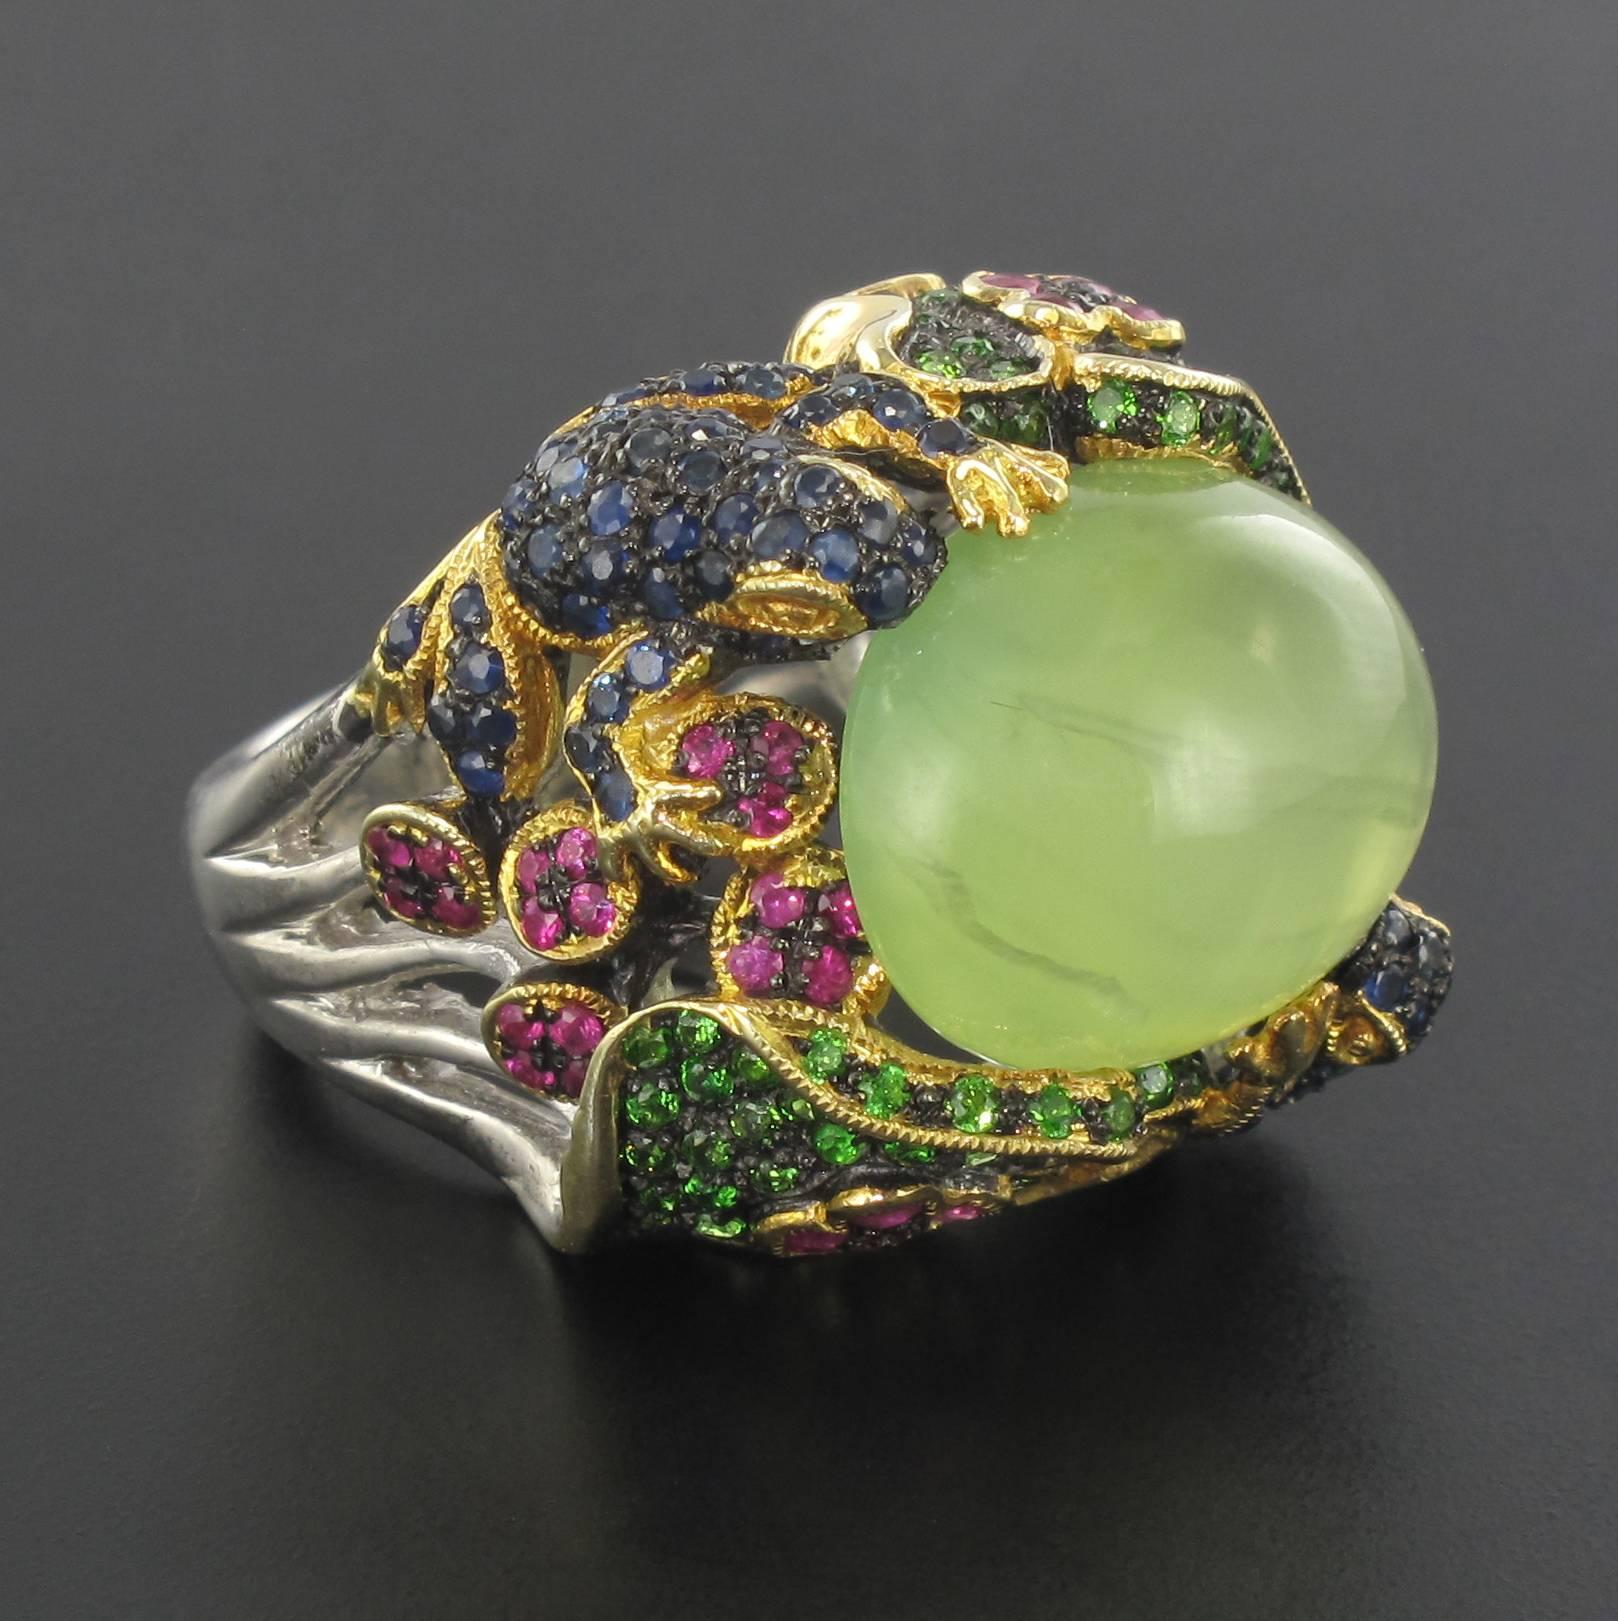 Women's Water Lily and Frog Ring